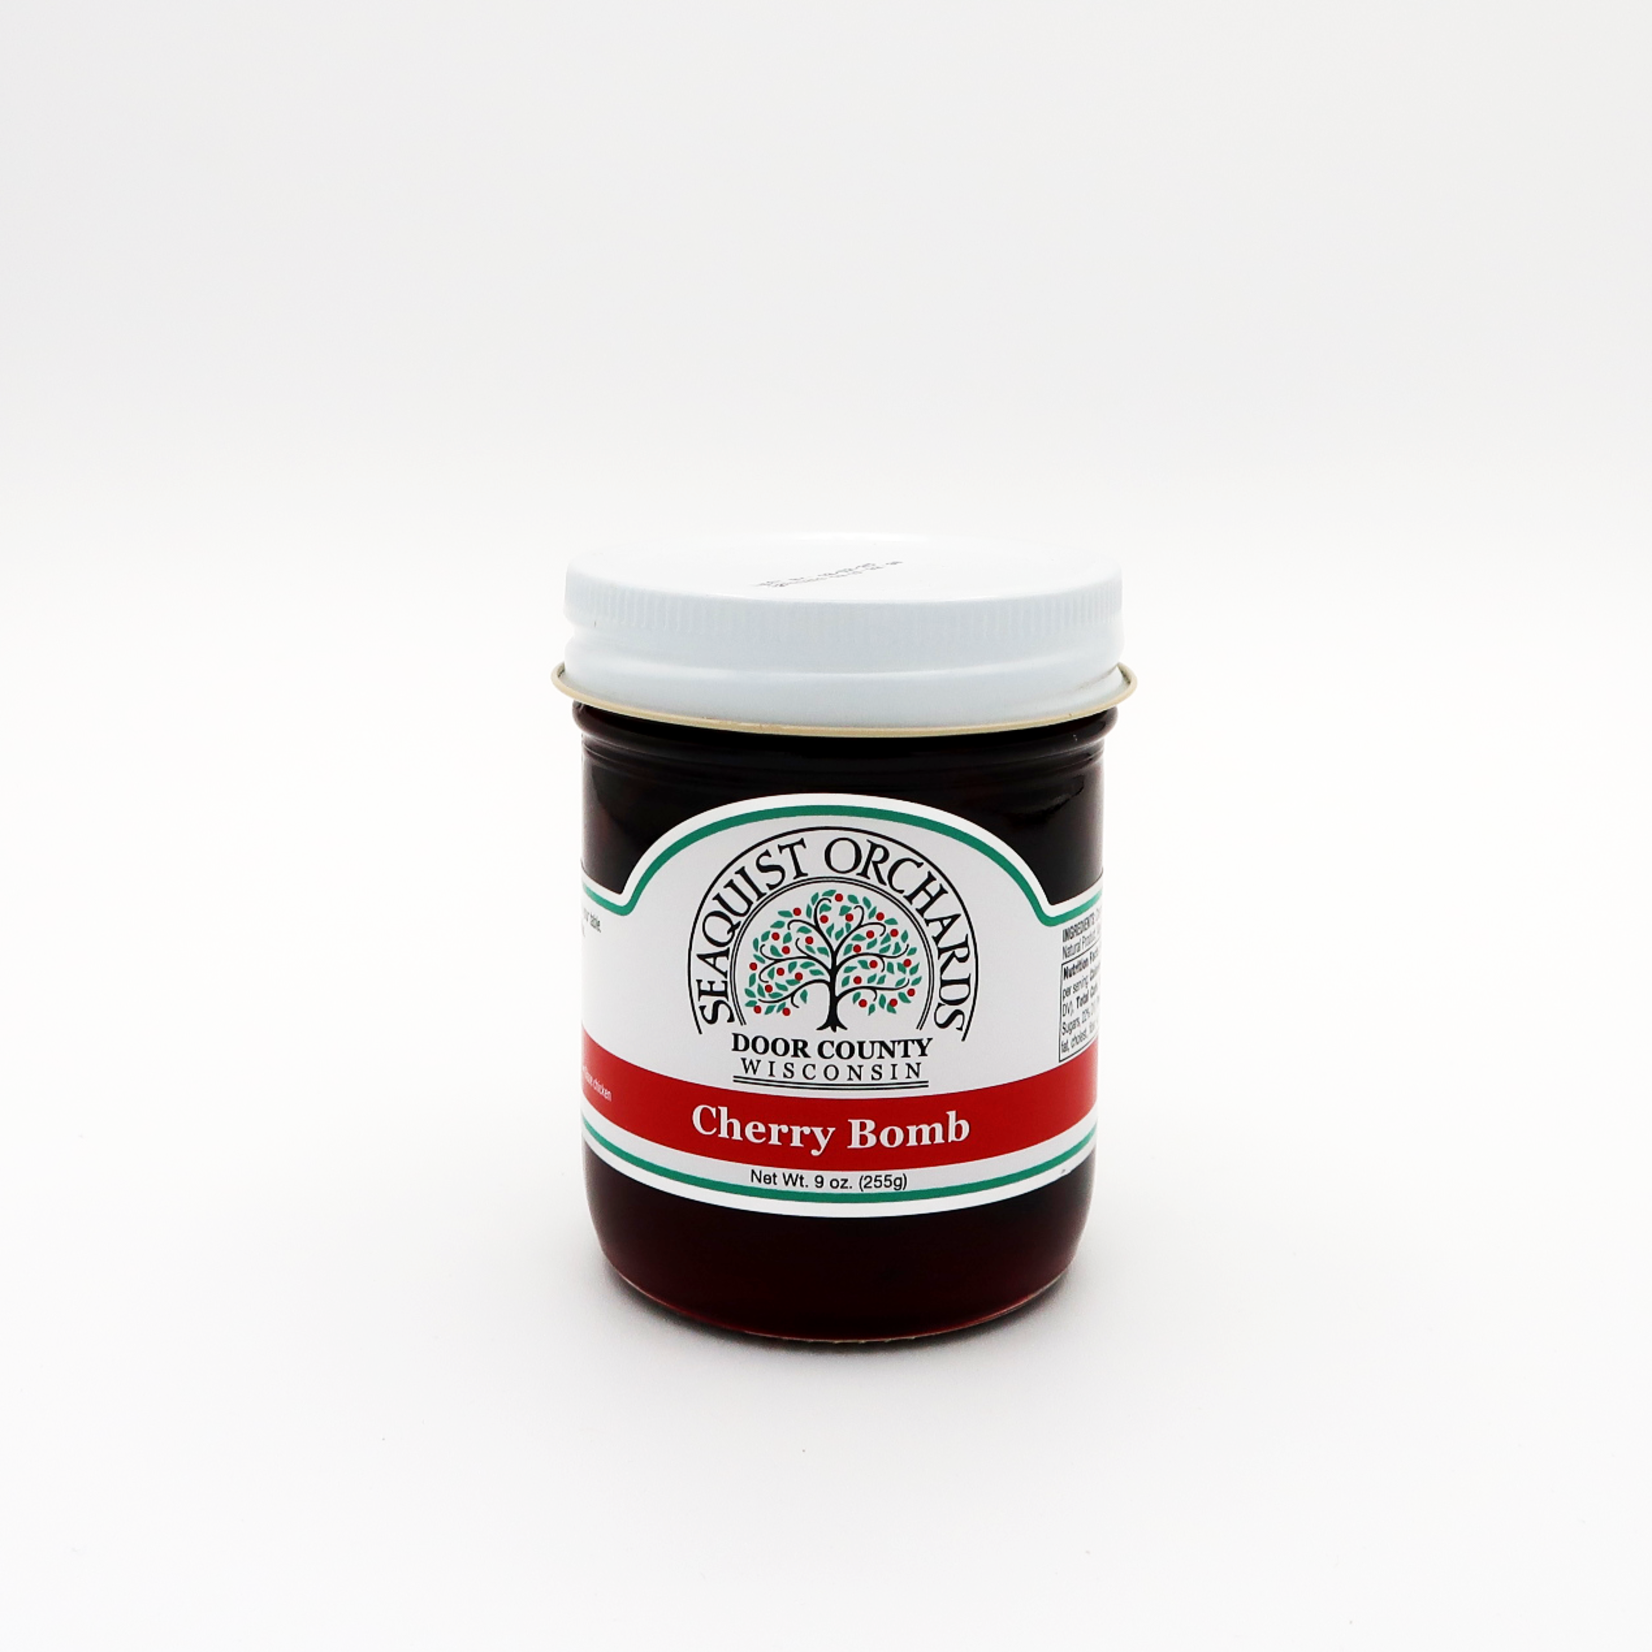 Seaquist Orchards Seaquist Orchard Cherry Jalapeno Jam